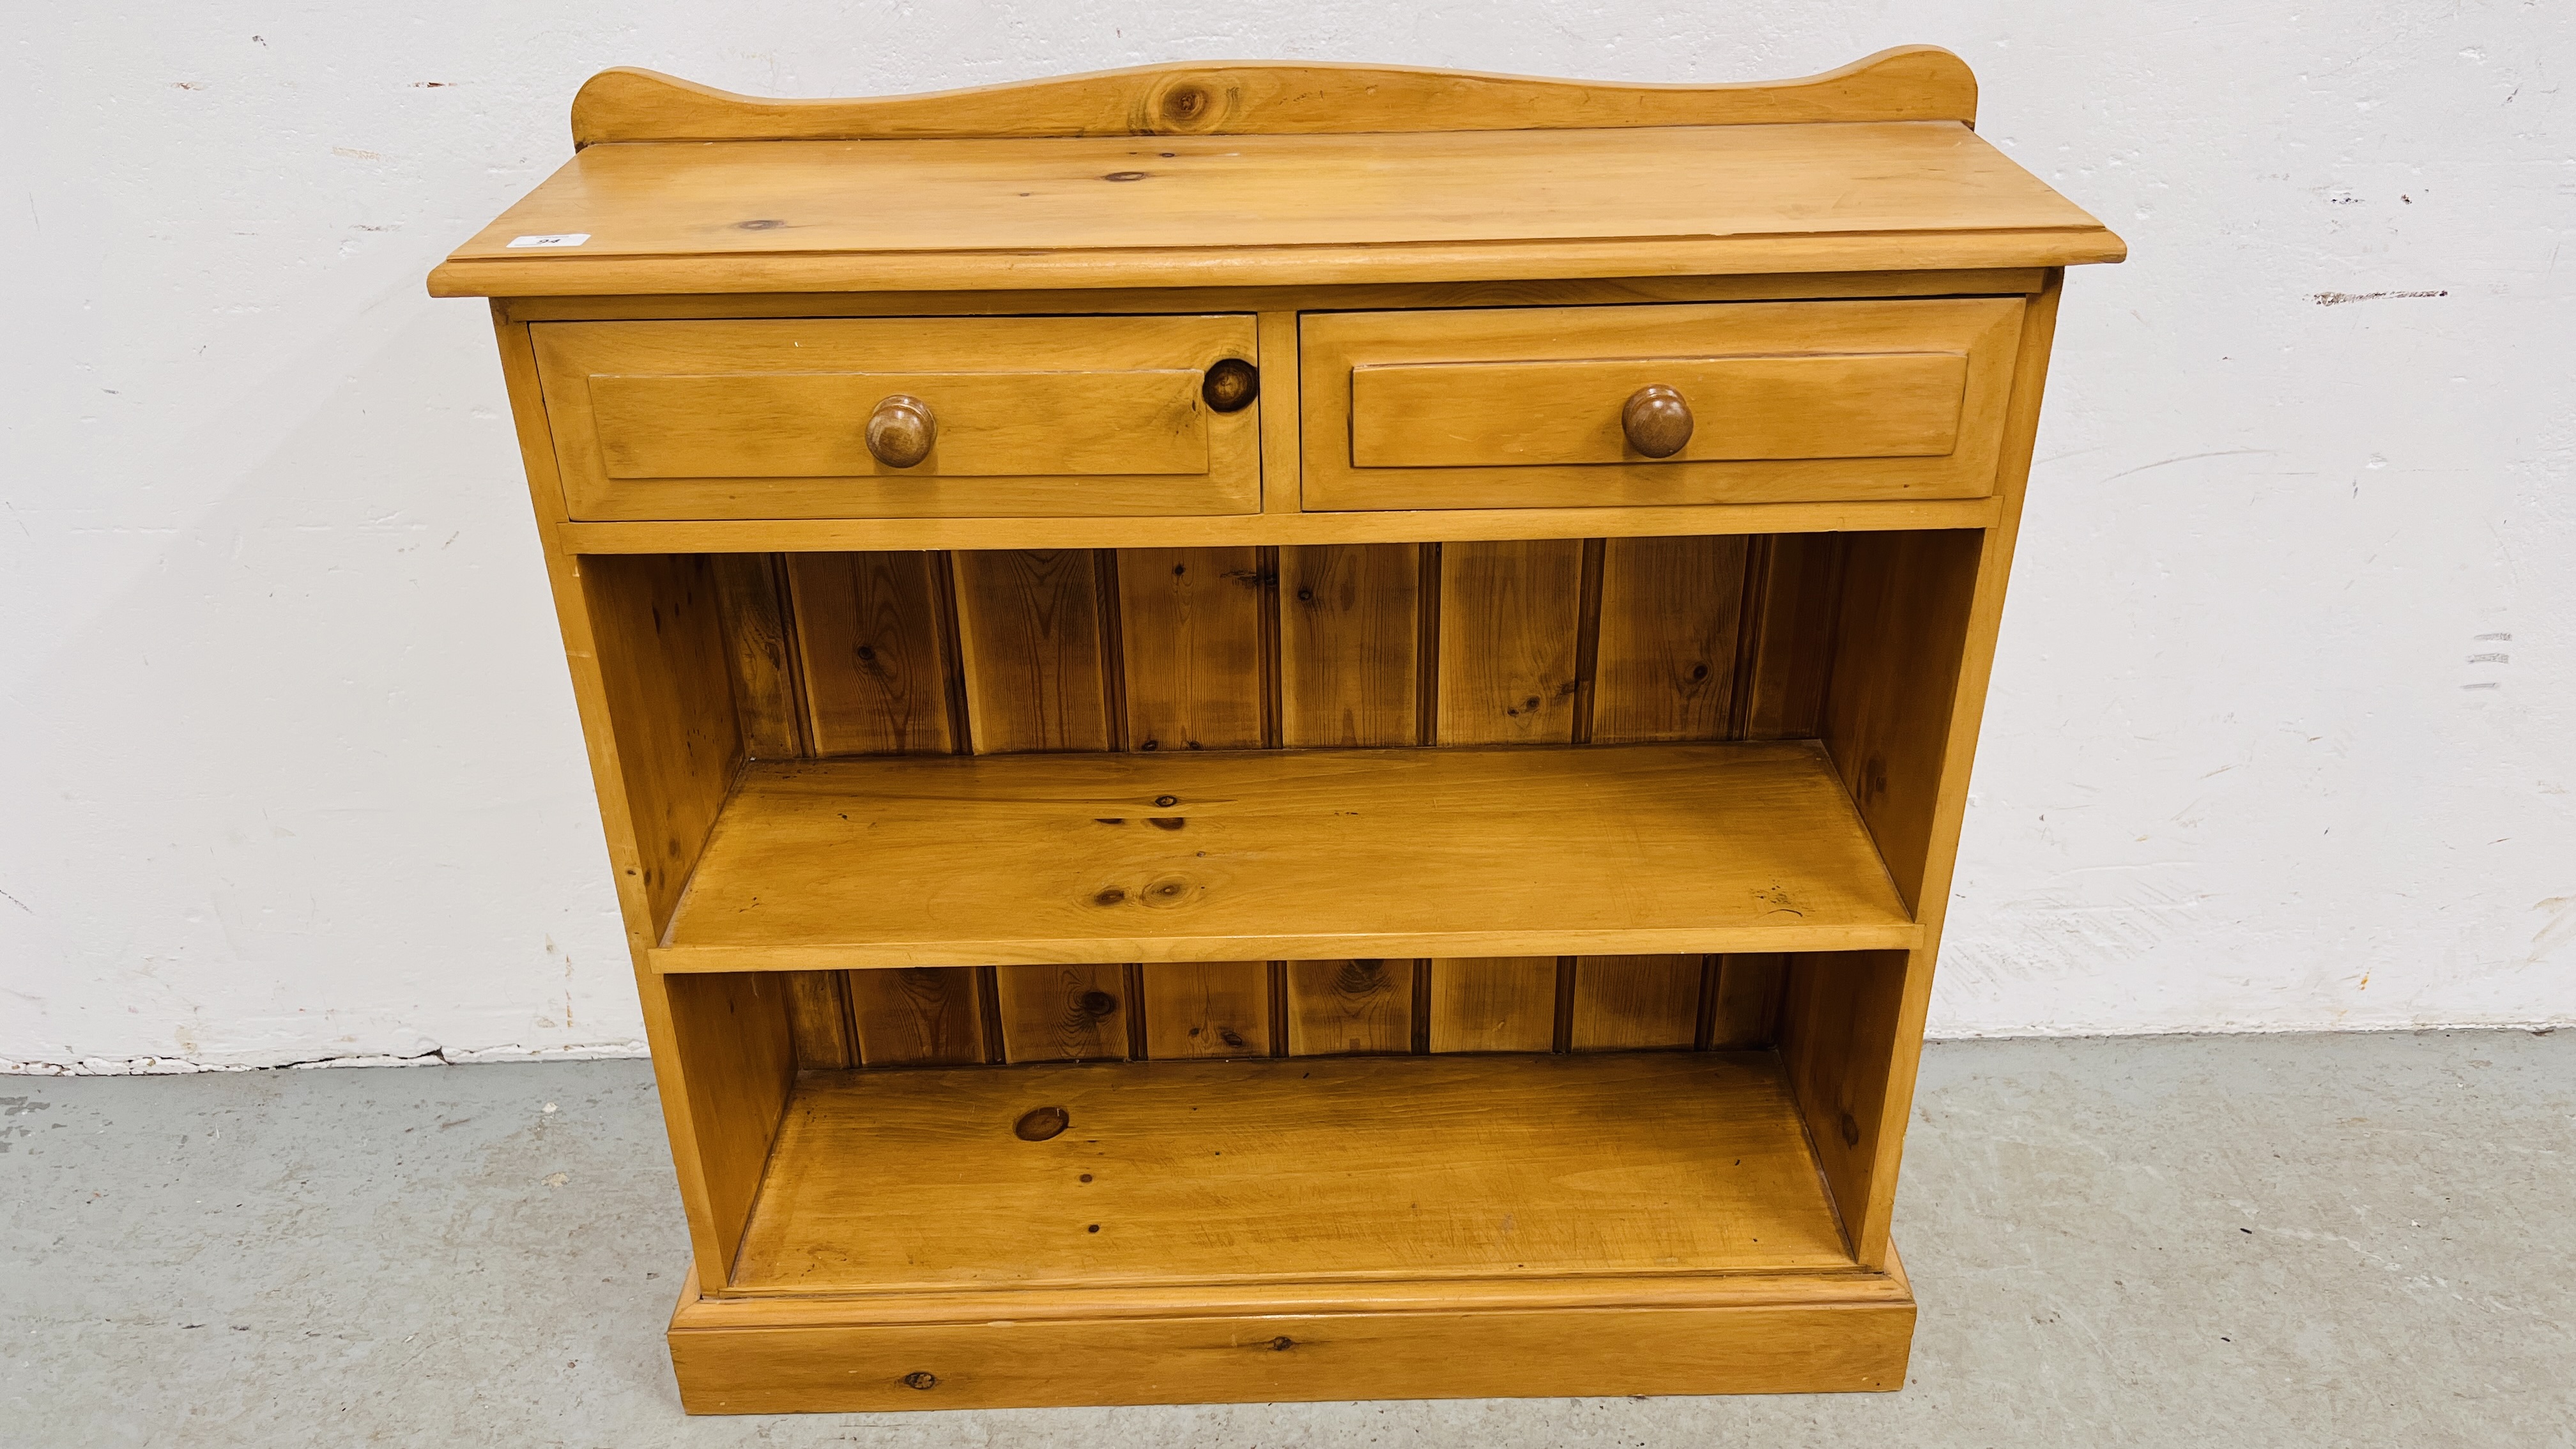 A WAXED PINE TWO TIER BOOKSHELF WITH DRAWERS, W 87CM, D 27CM, H 88CM.